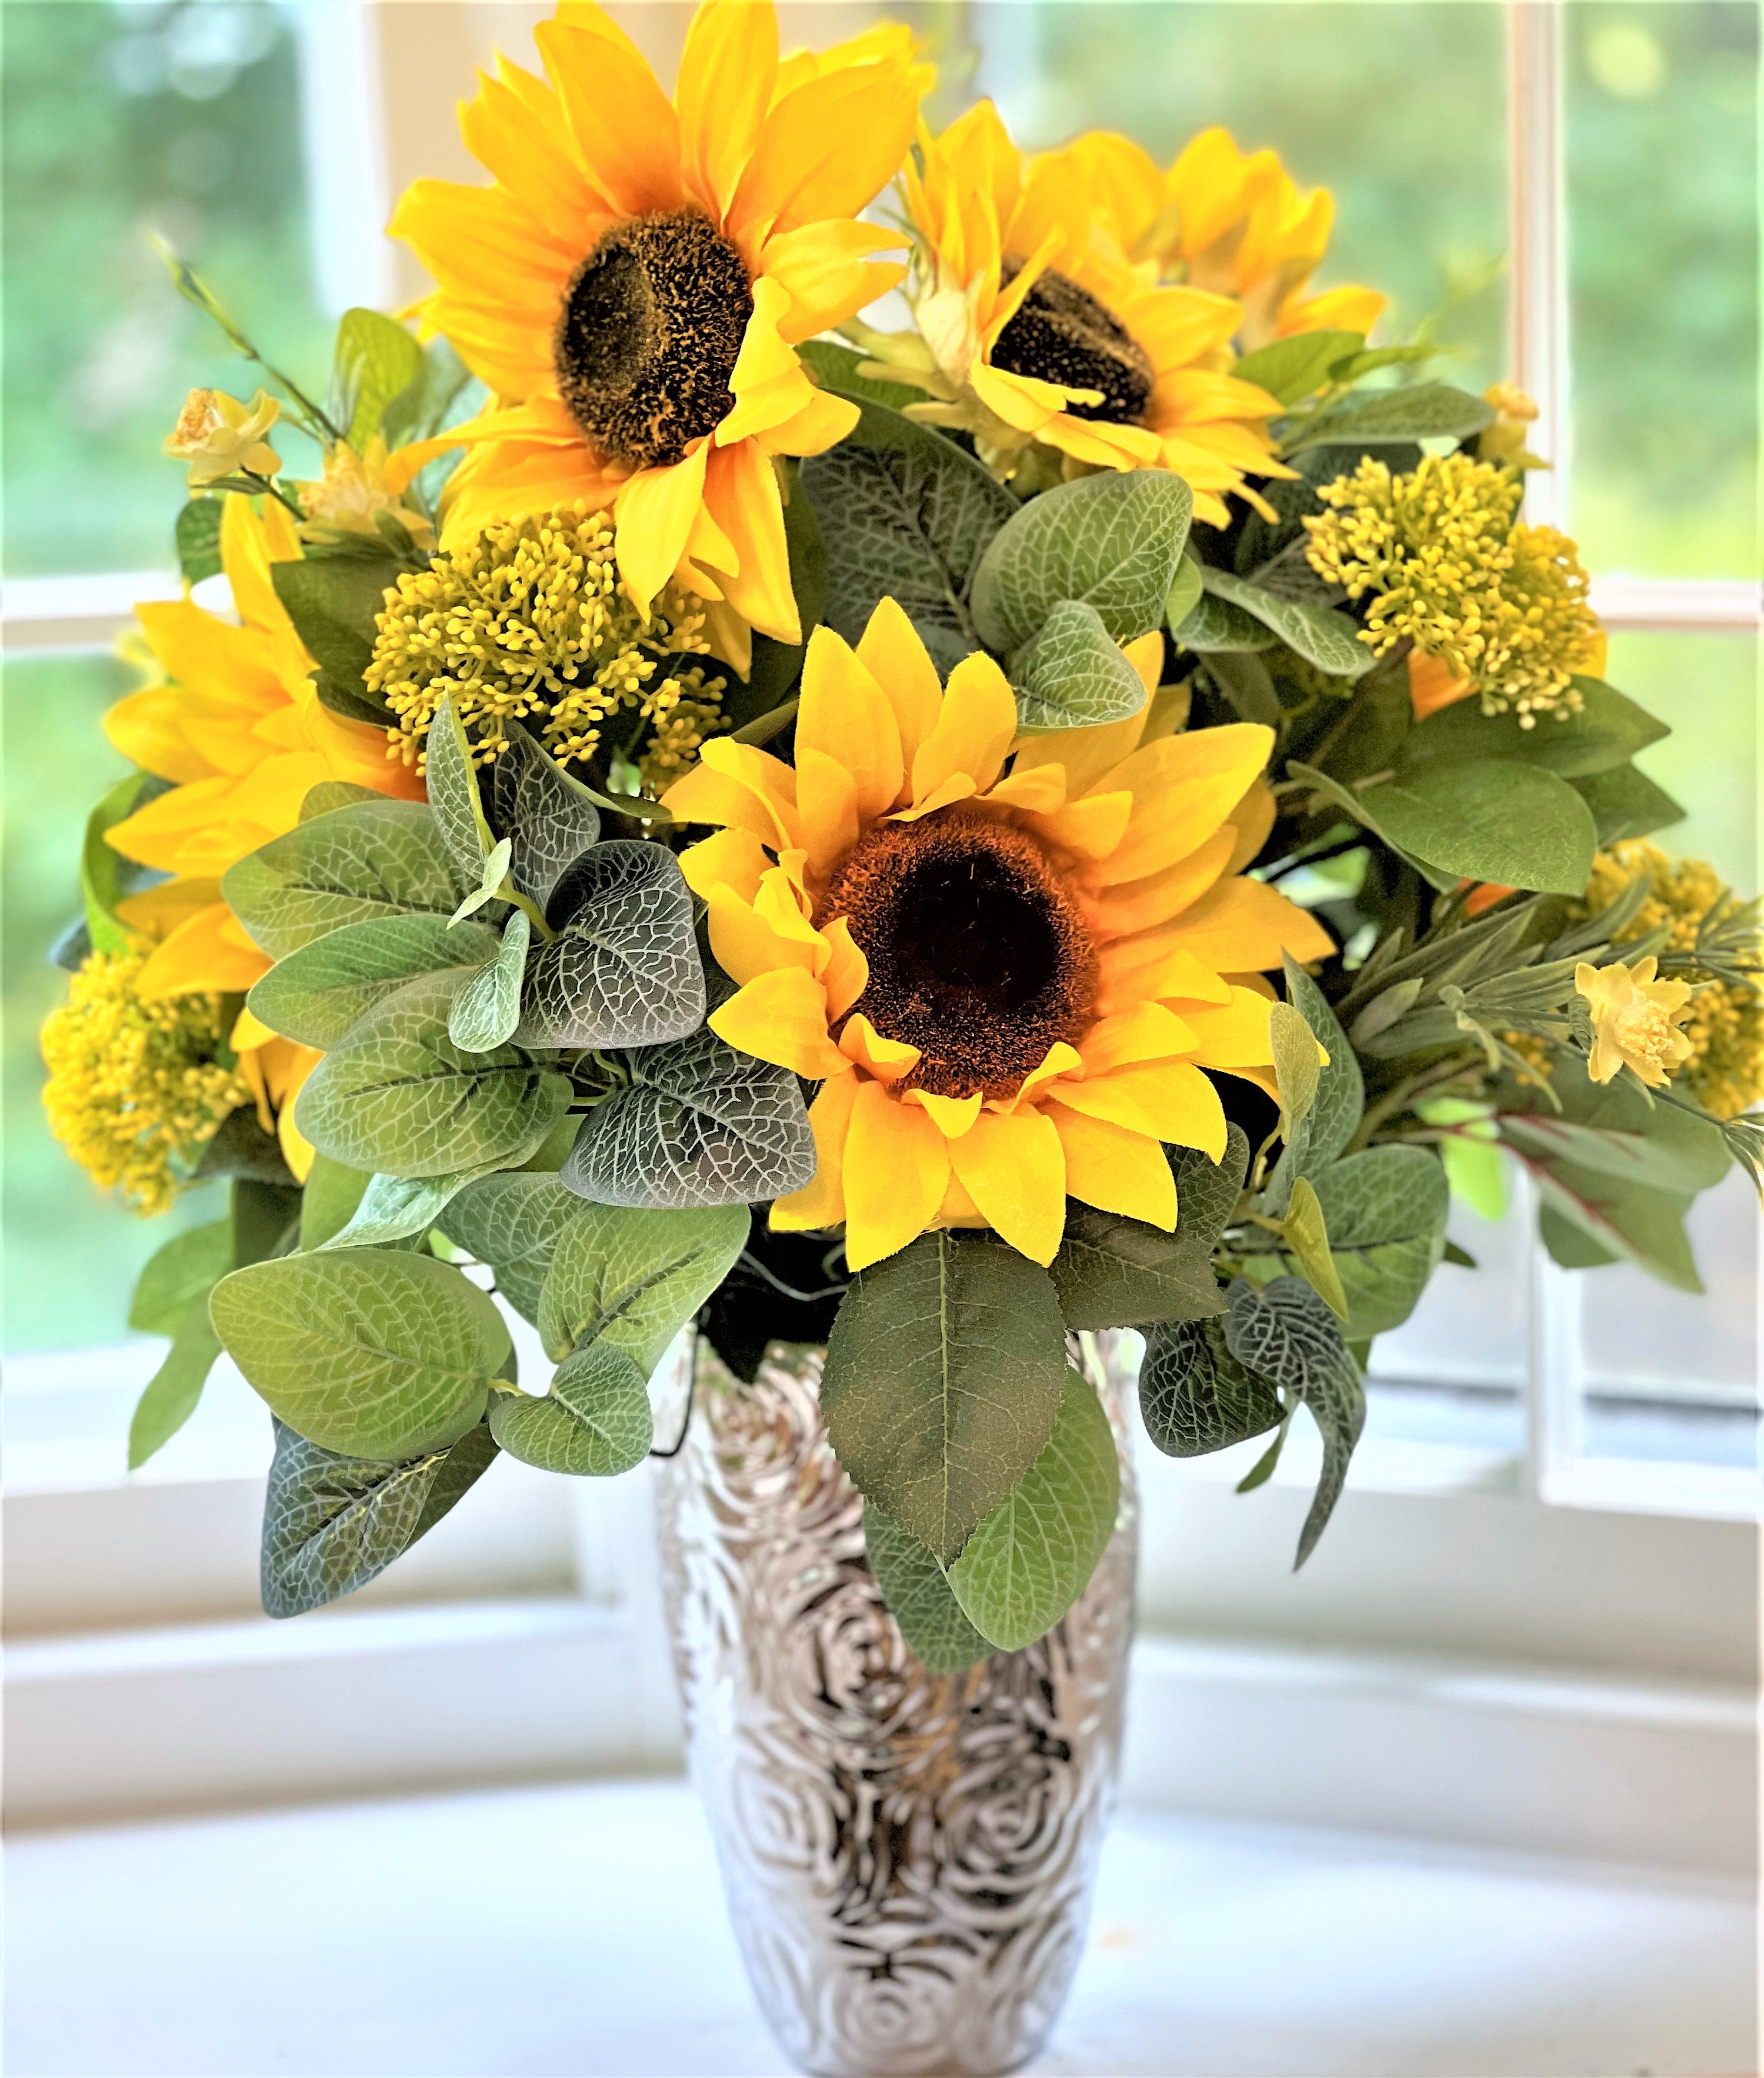 Sunflower Centerpiece, Home Décor, Gift 20"H X18"W with 10" Silver Vase